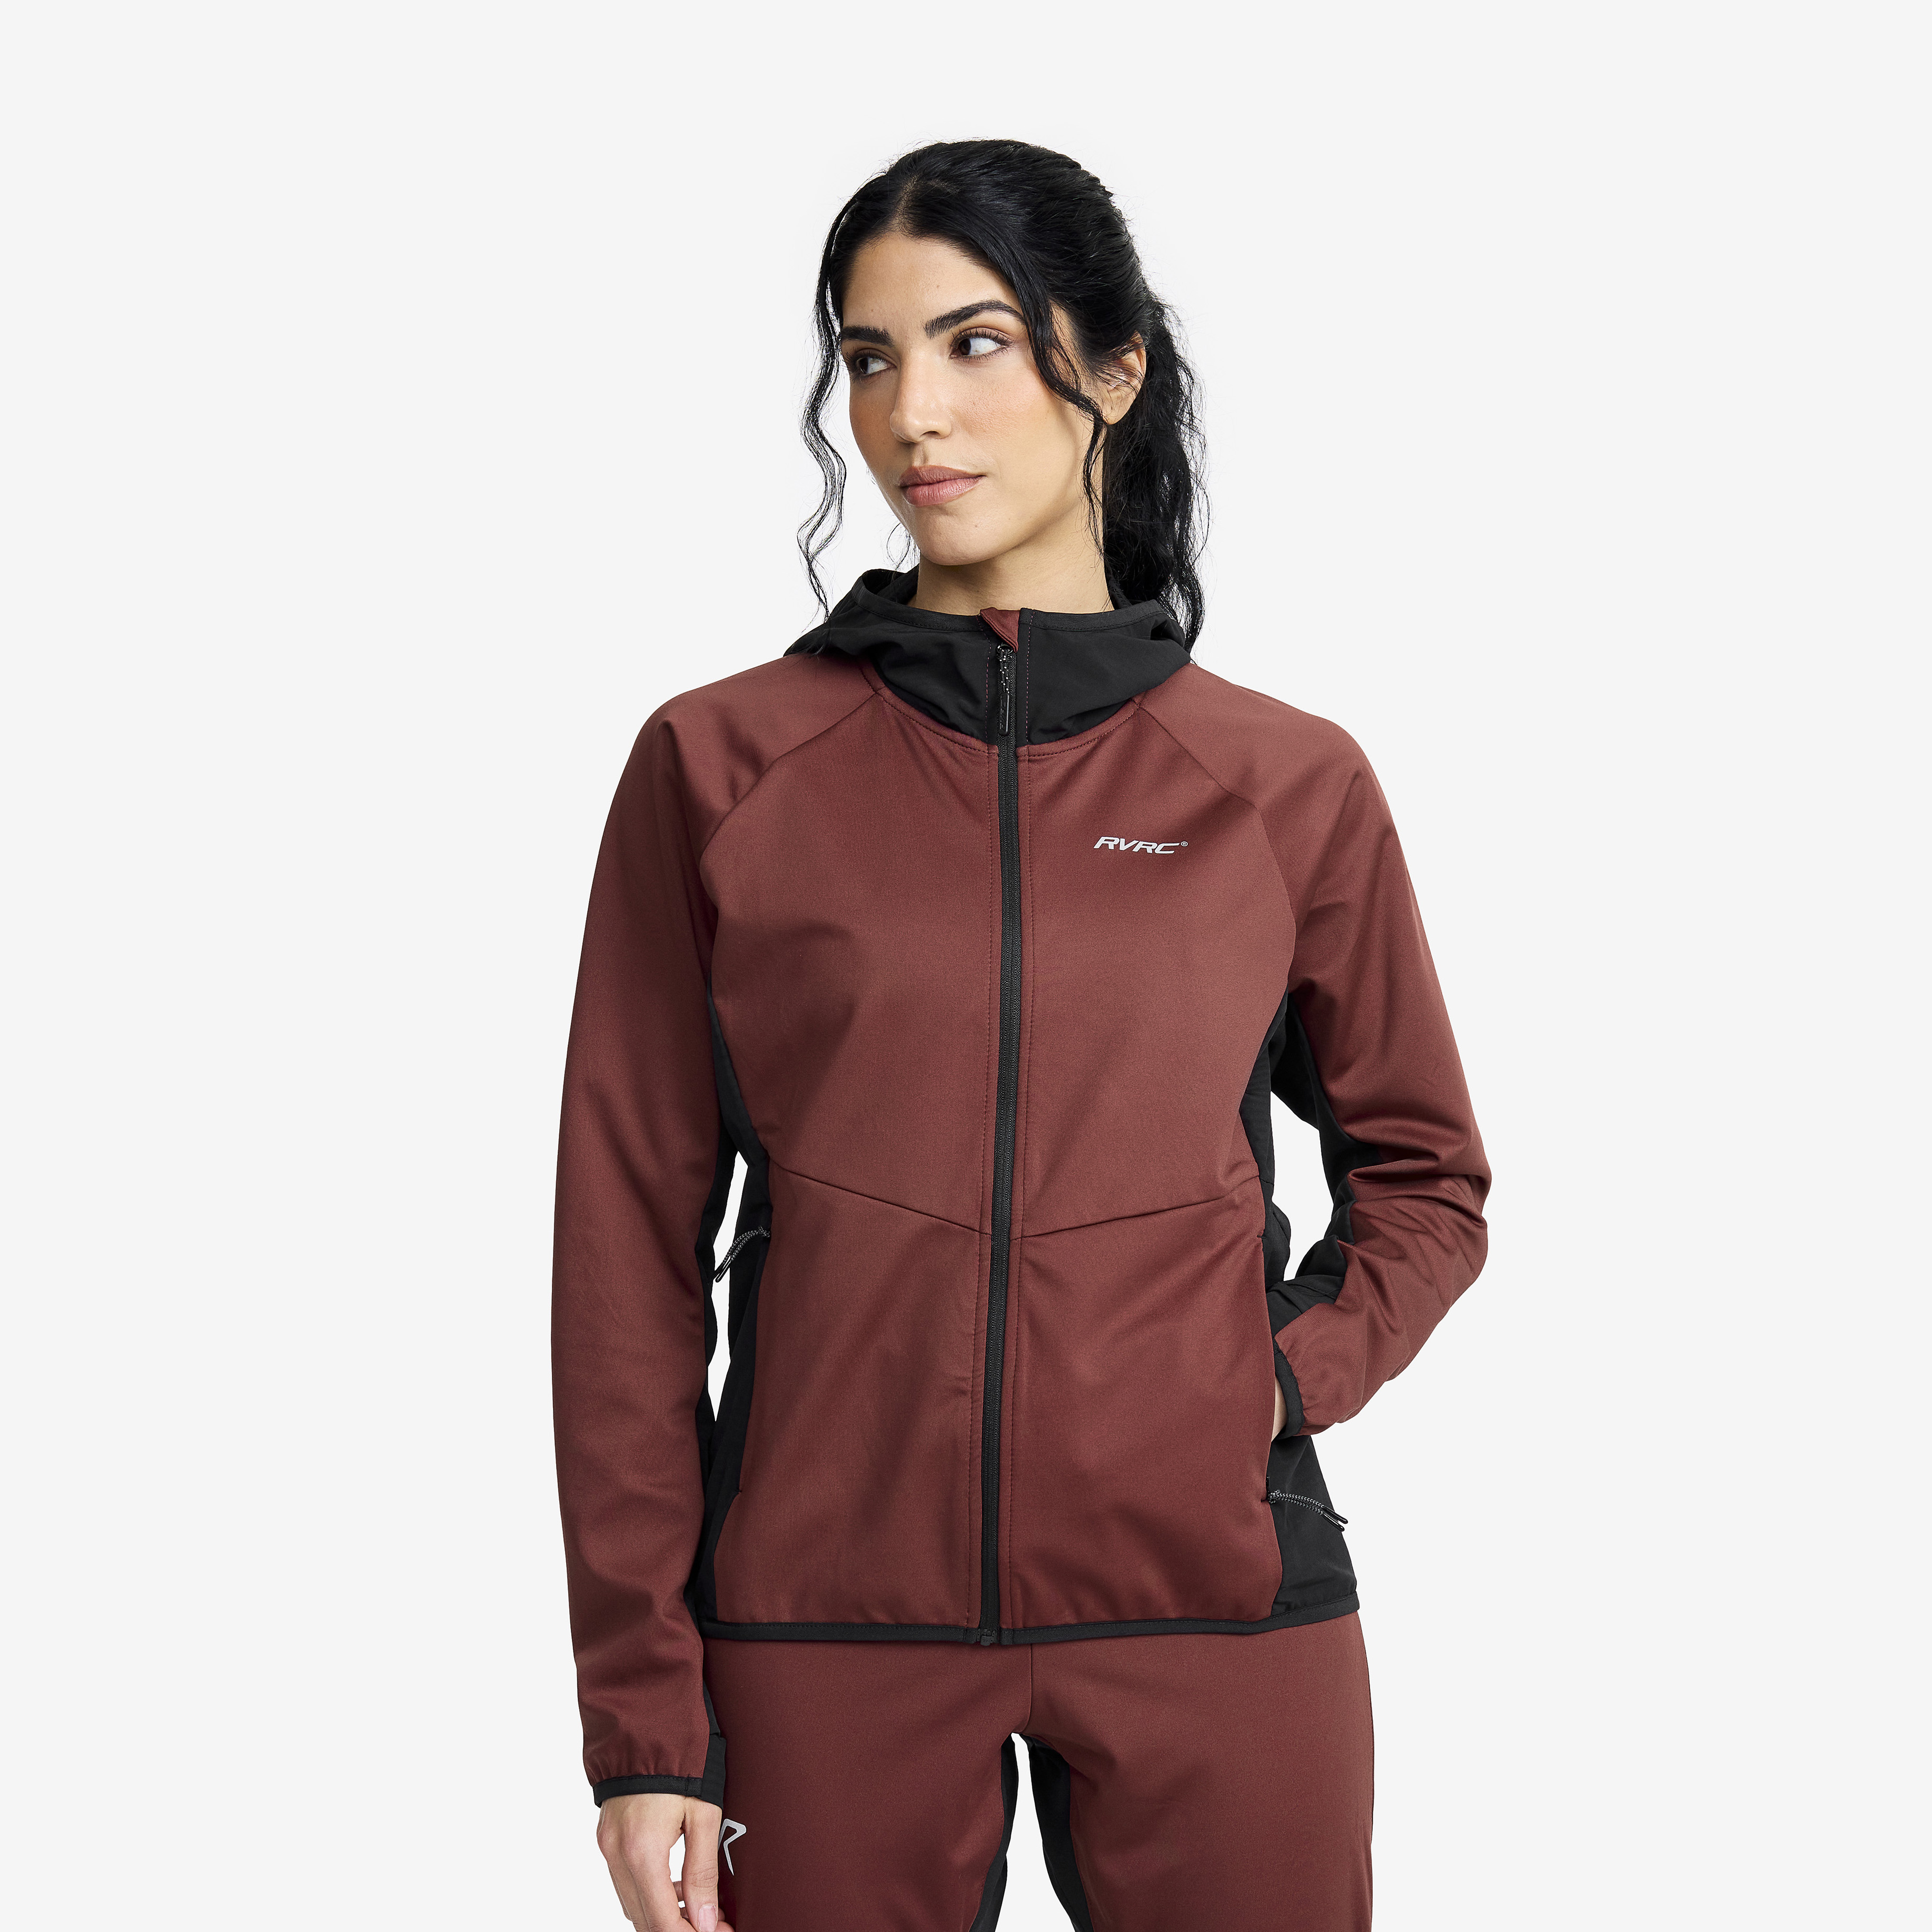 Pace Hooded Wind Jacket Andorra Donna